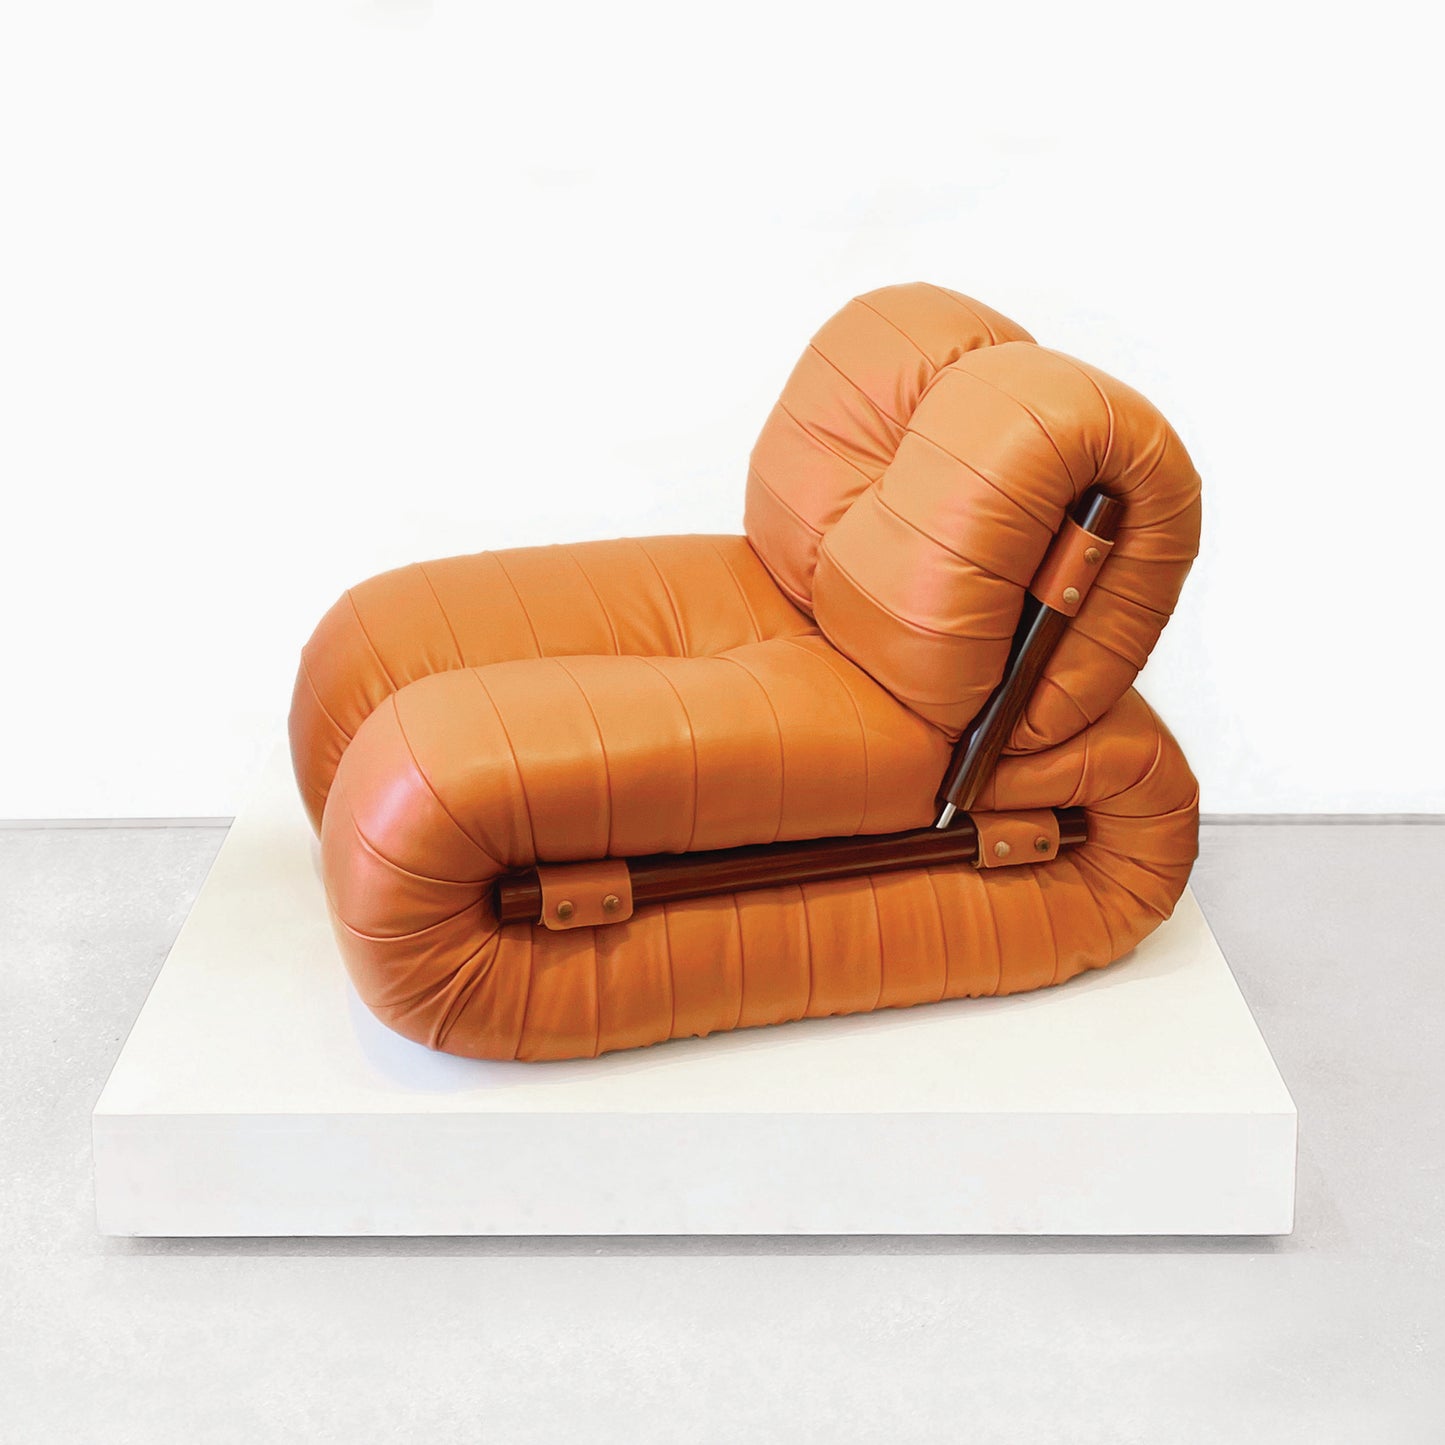 Percival Lafer 'Lounge Chair'